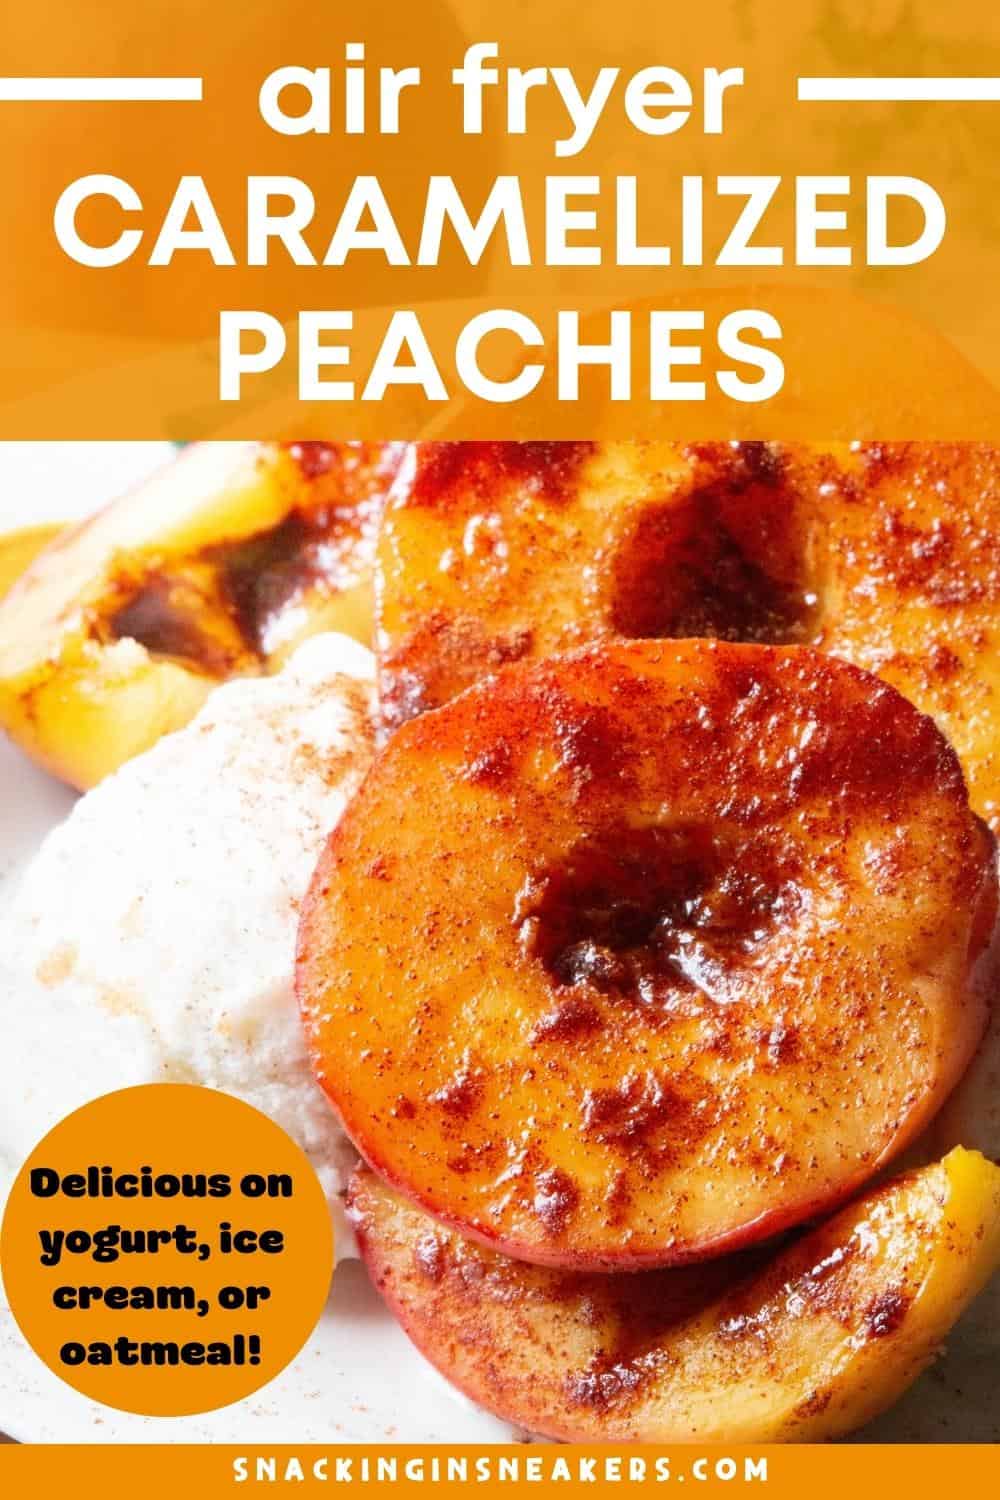 A close up of an air fryer caramelized peach with a text overlay that says the name of the recipe.